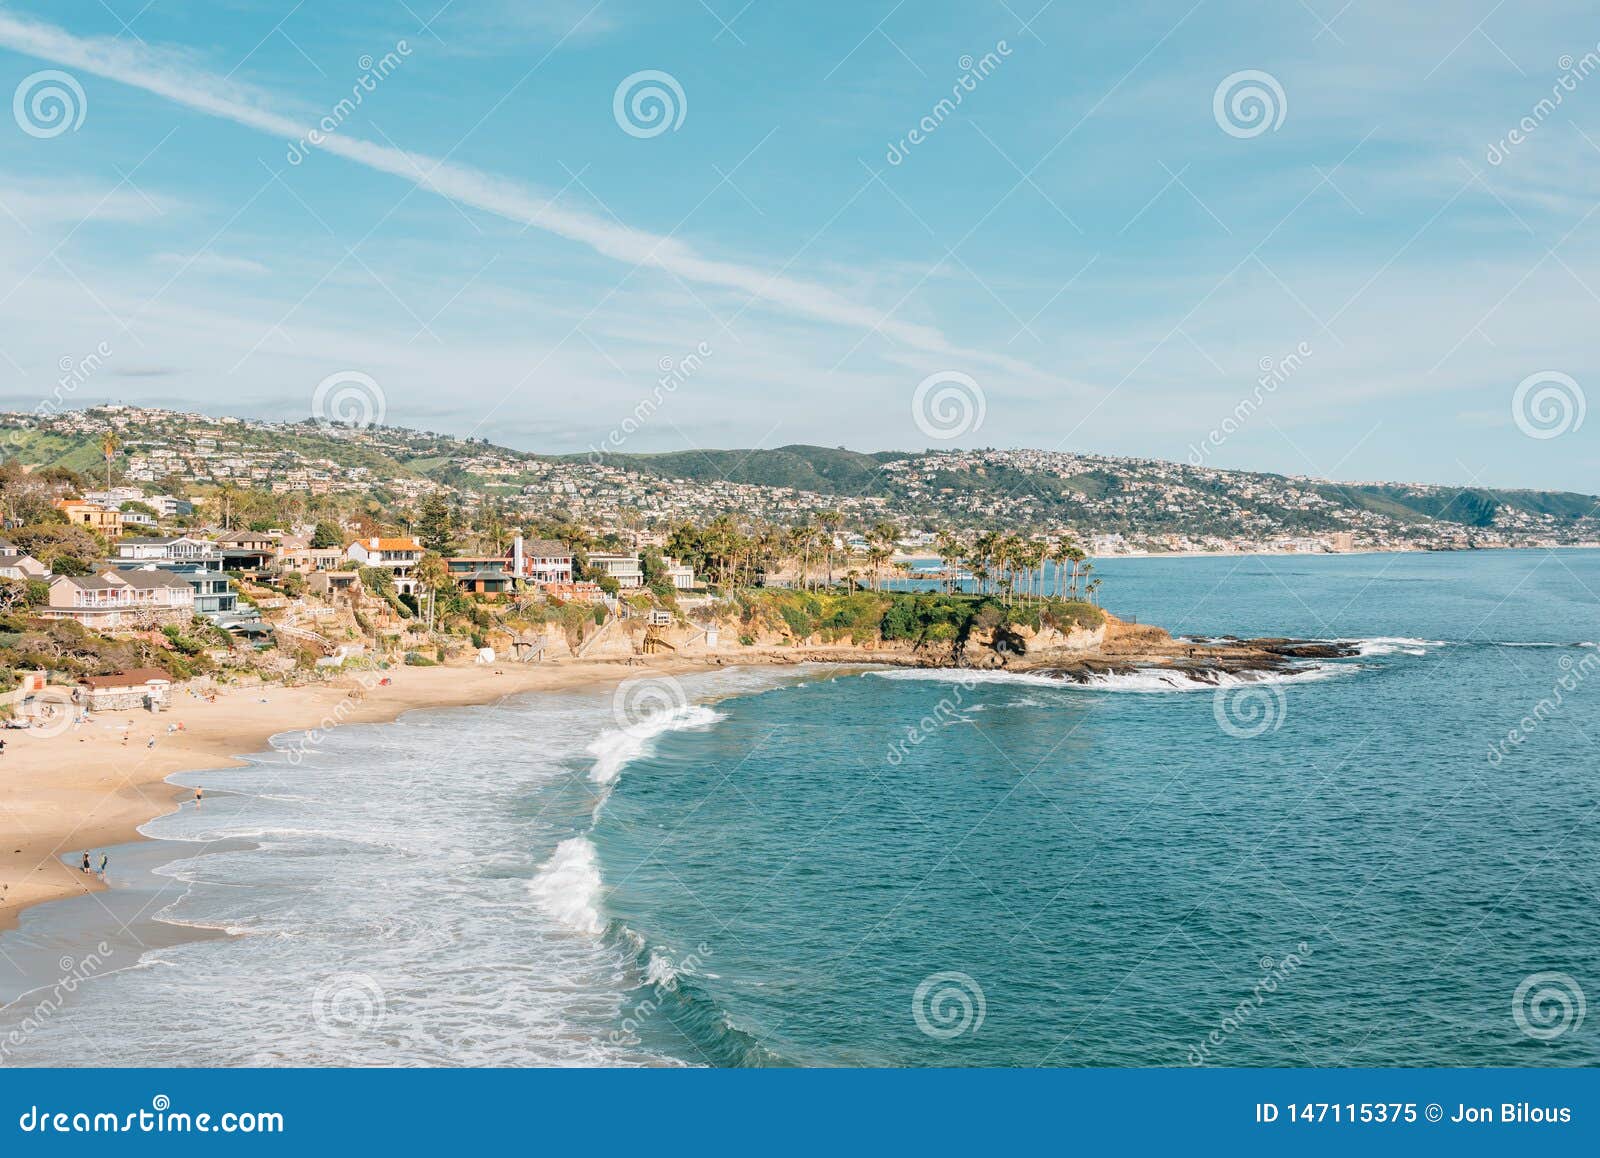 view of beach and cliffs at crescent bay, from crescent bay point park, in laguna beach, california